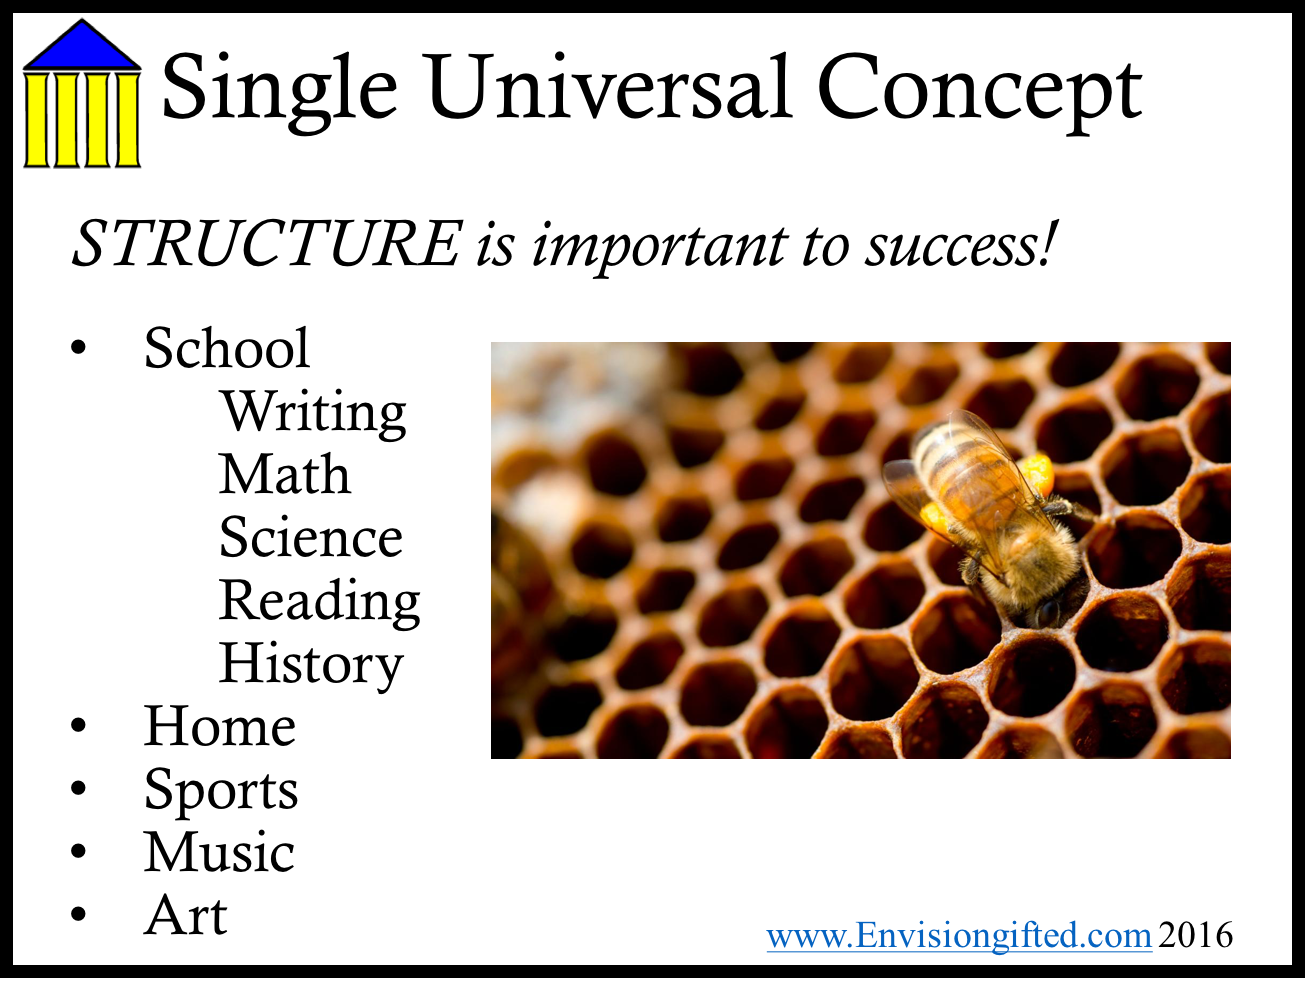 Envision Gifted. Universal Concept Structure